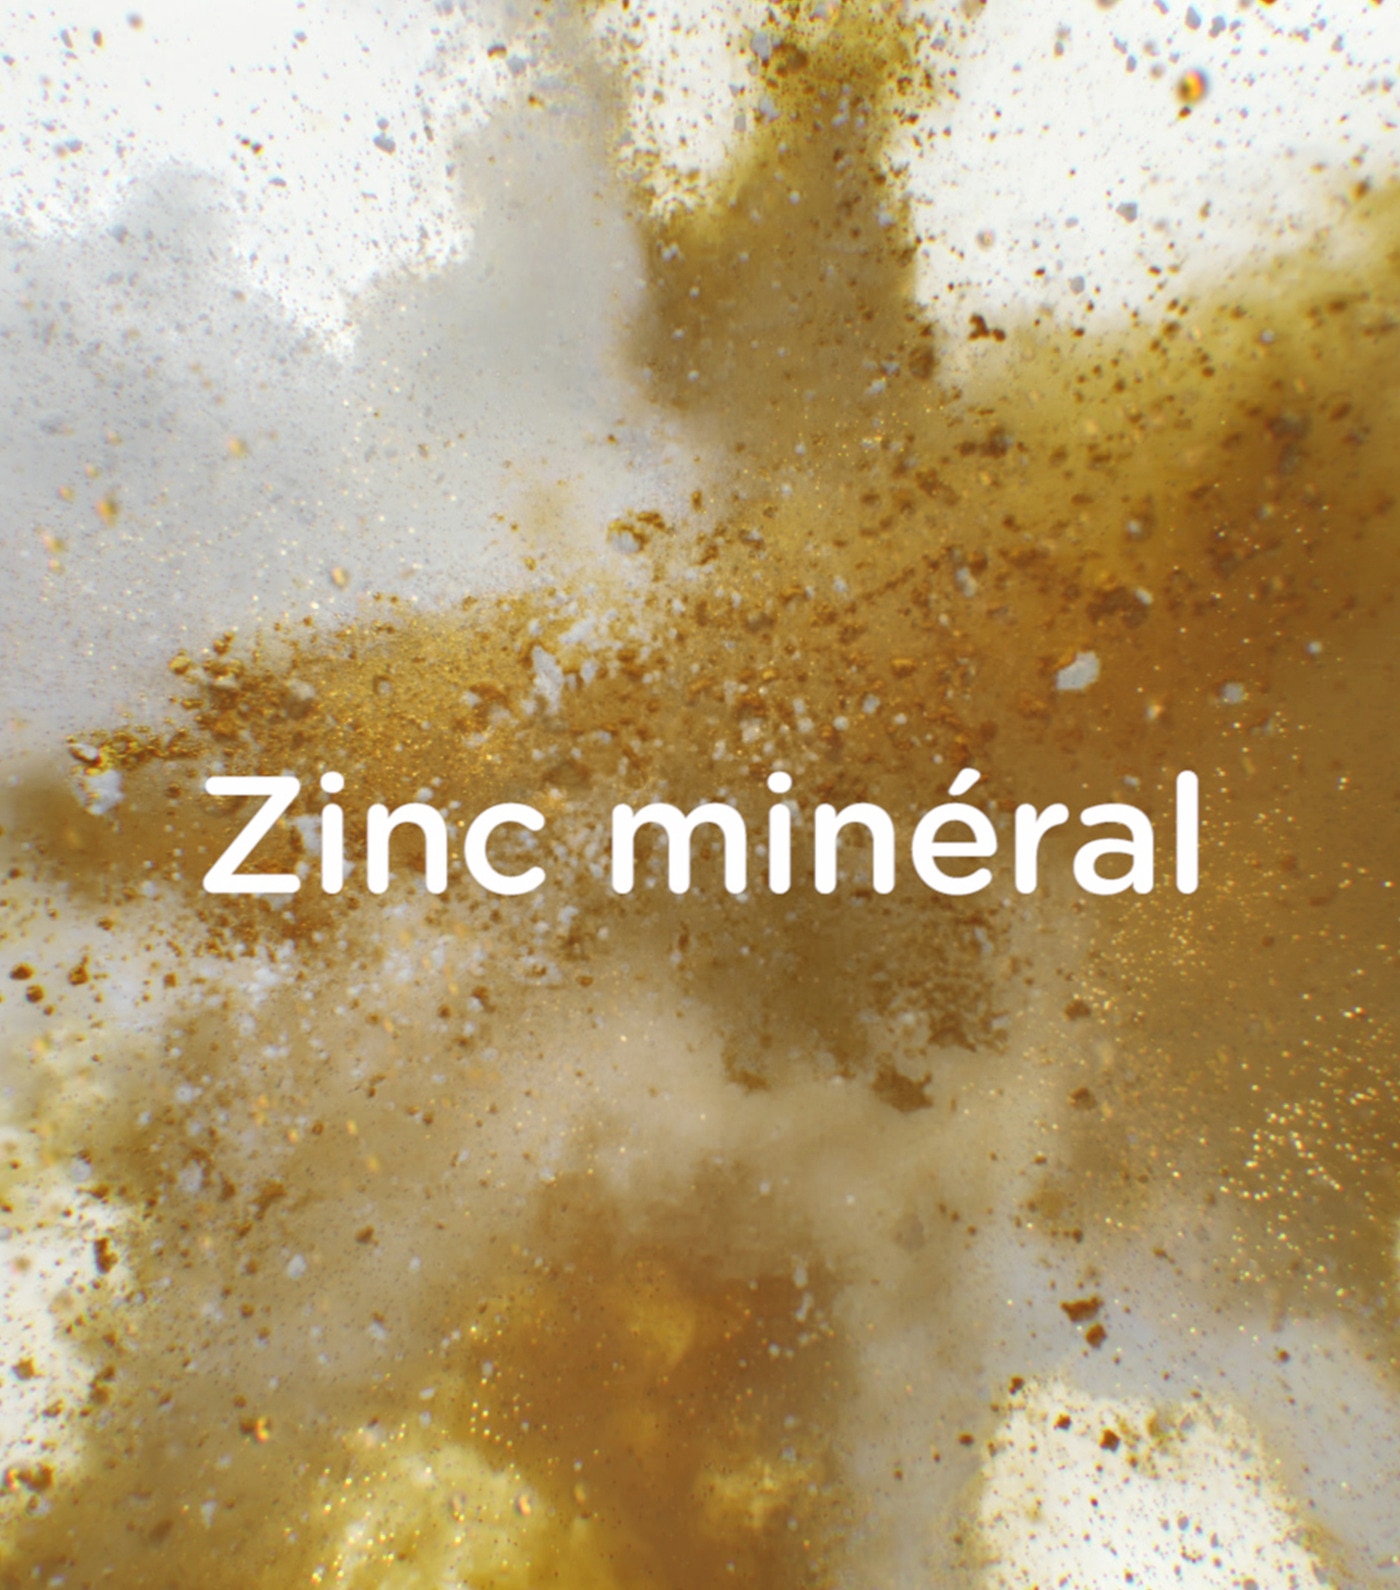 Zinc mineral: the health & wellbeing hero in your toothpaste